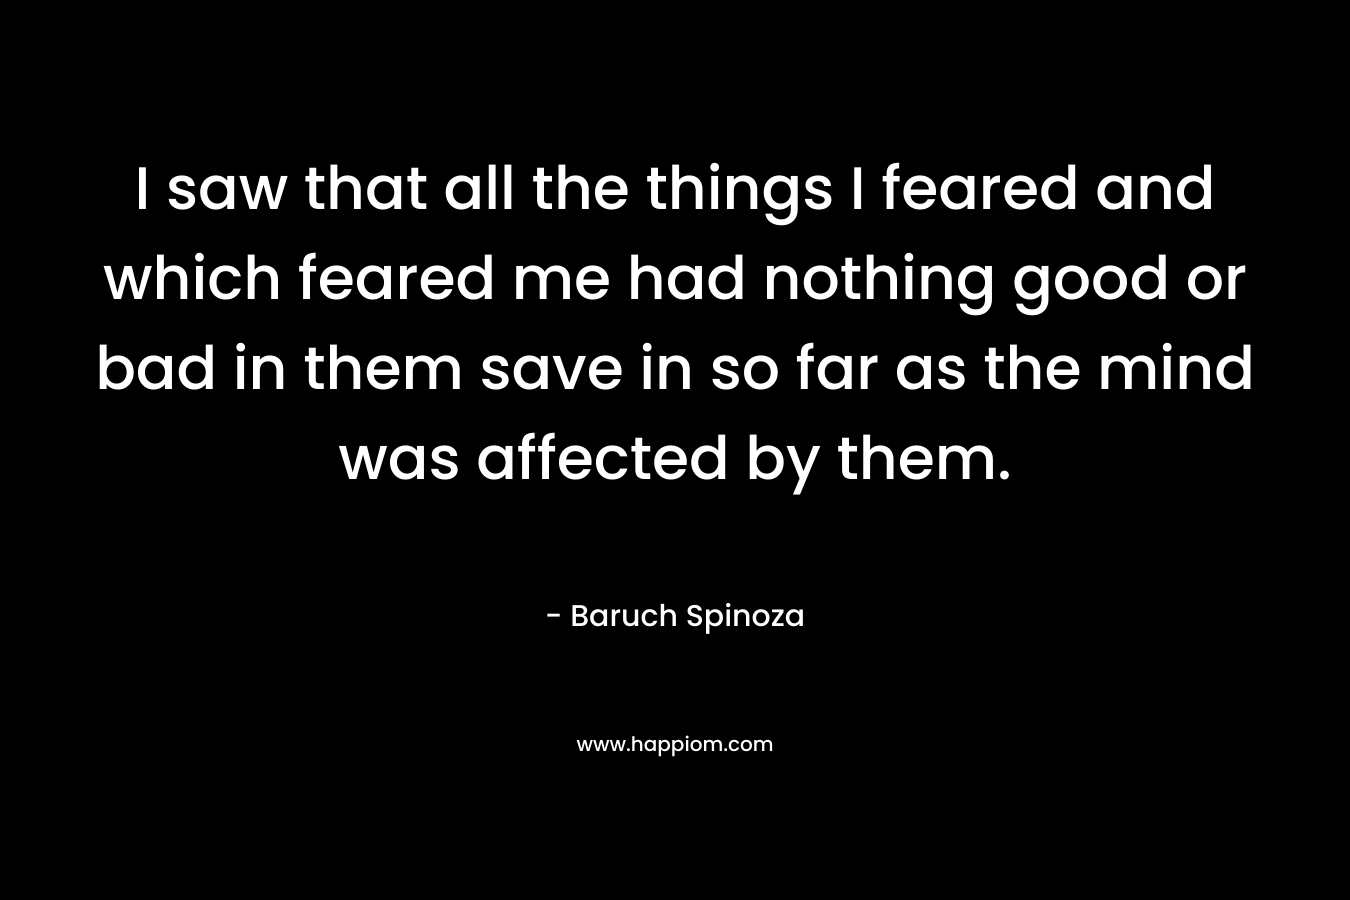 I saw that all the things I feared and which feared me had nothing good or bad in them save in so far as the mind was affected by them. – Baruch Spinoza